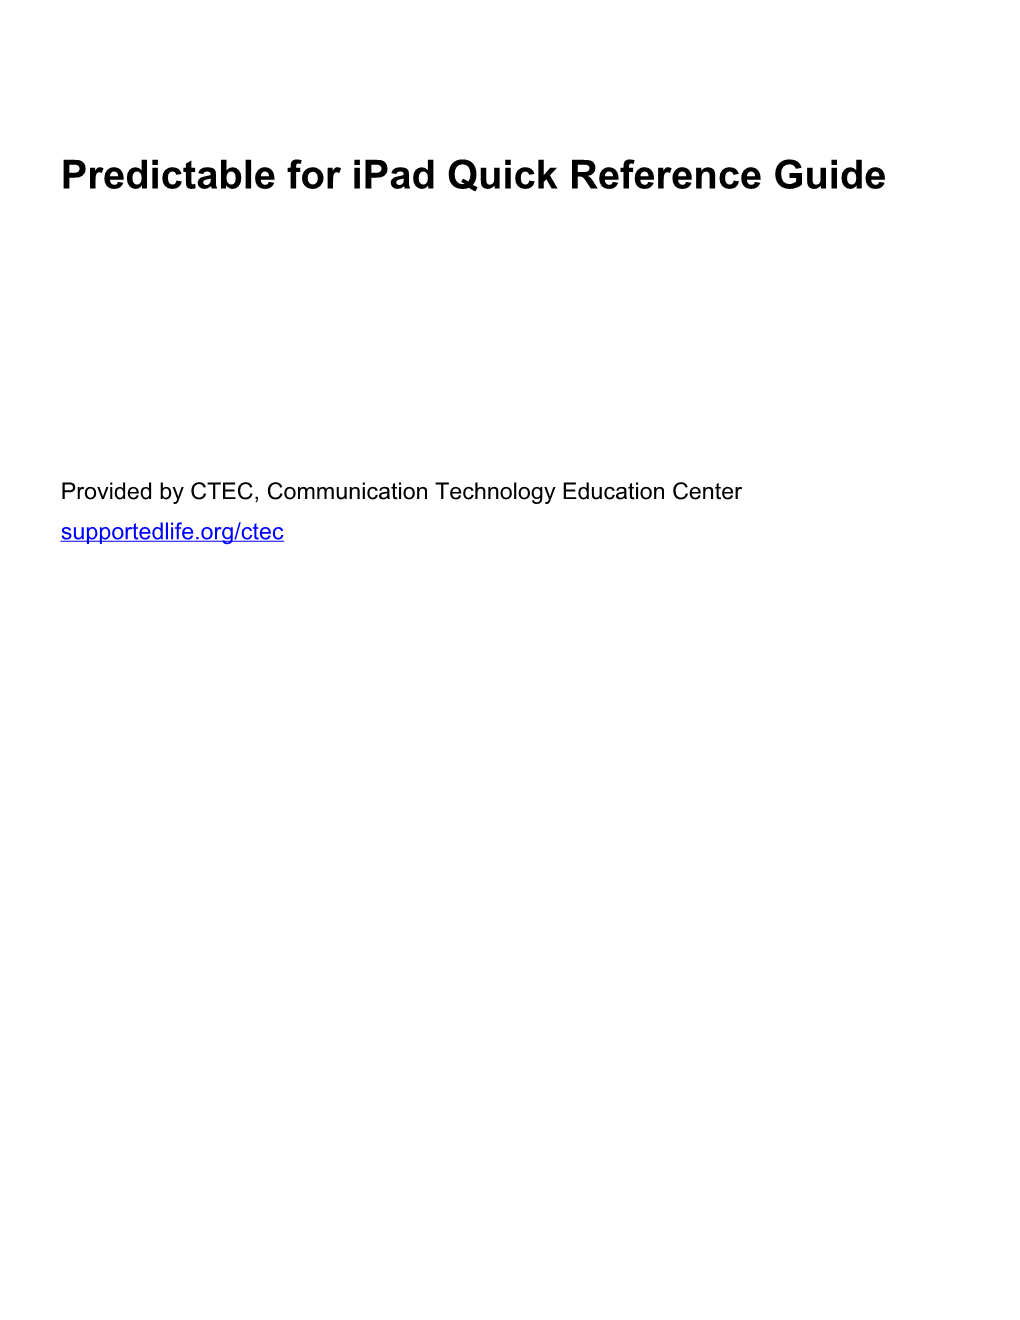 Predictable for Ipad Quick Reference Guide